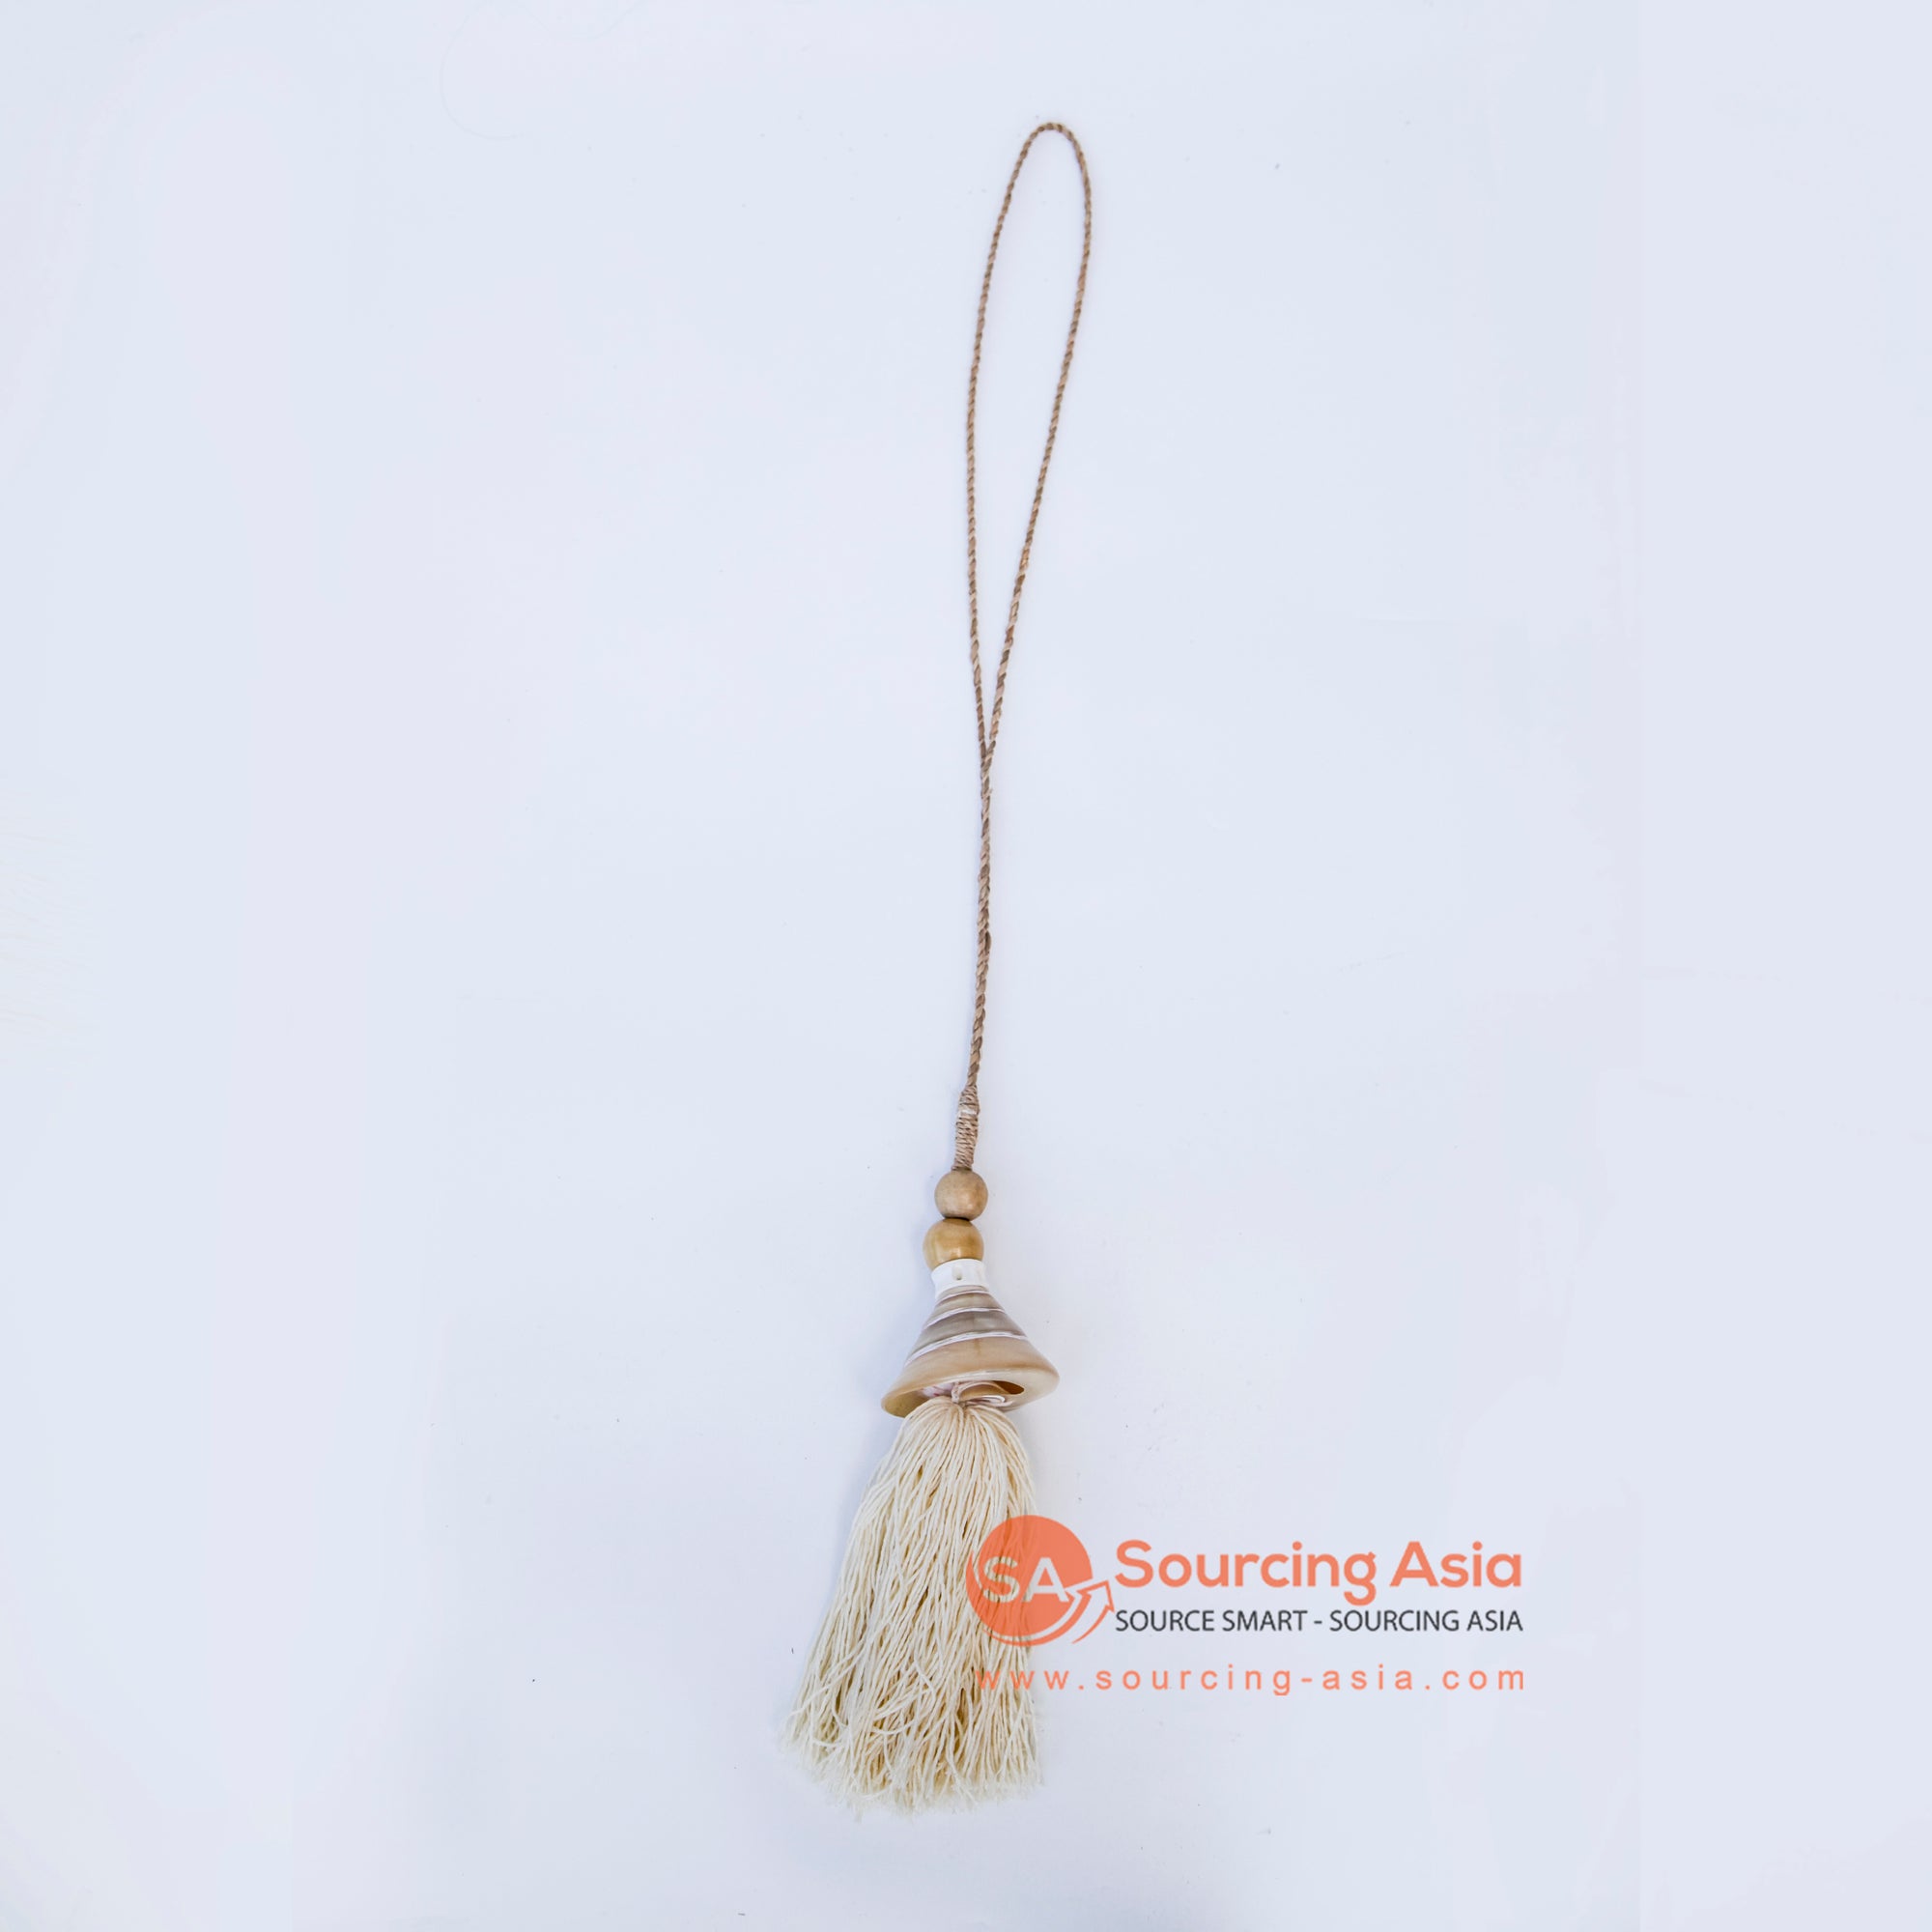 DHL077 NATURAL ROPE AND TASSEL NECKLACE WALL DECORATION